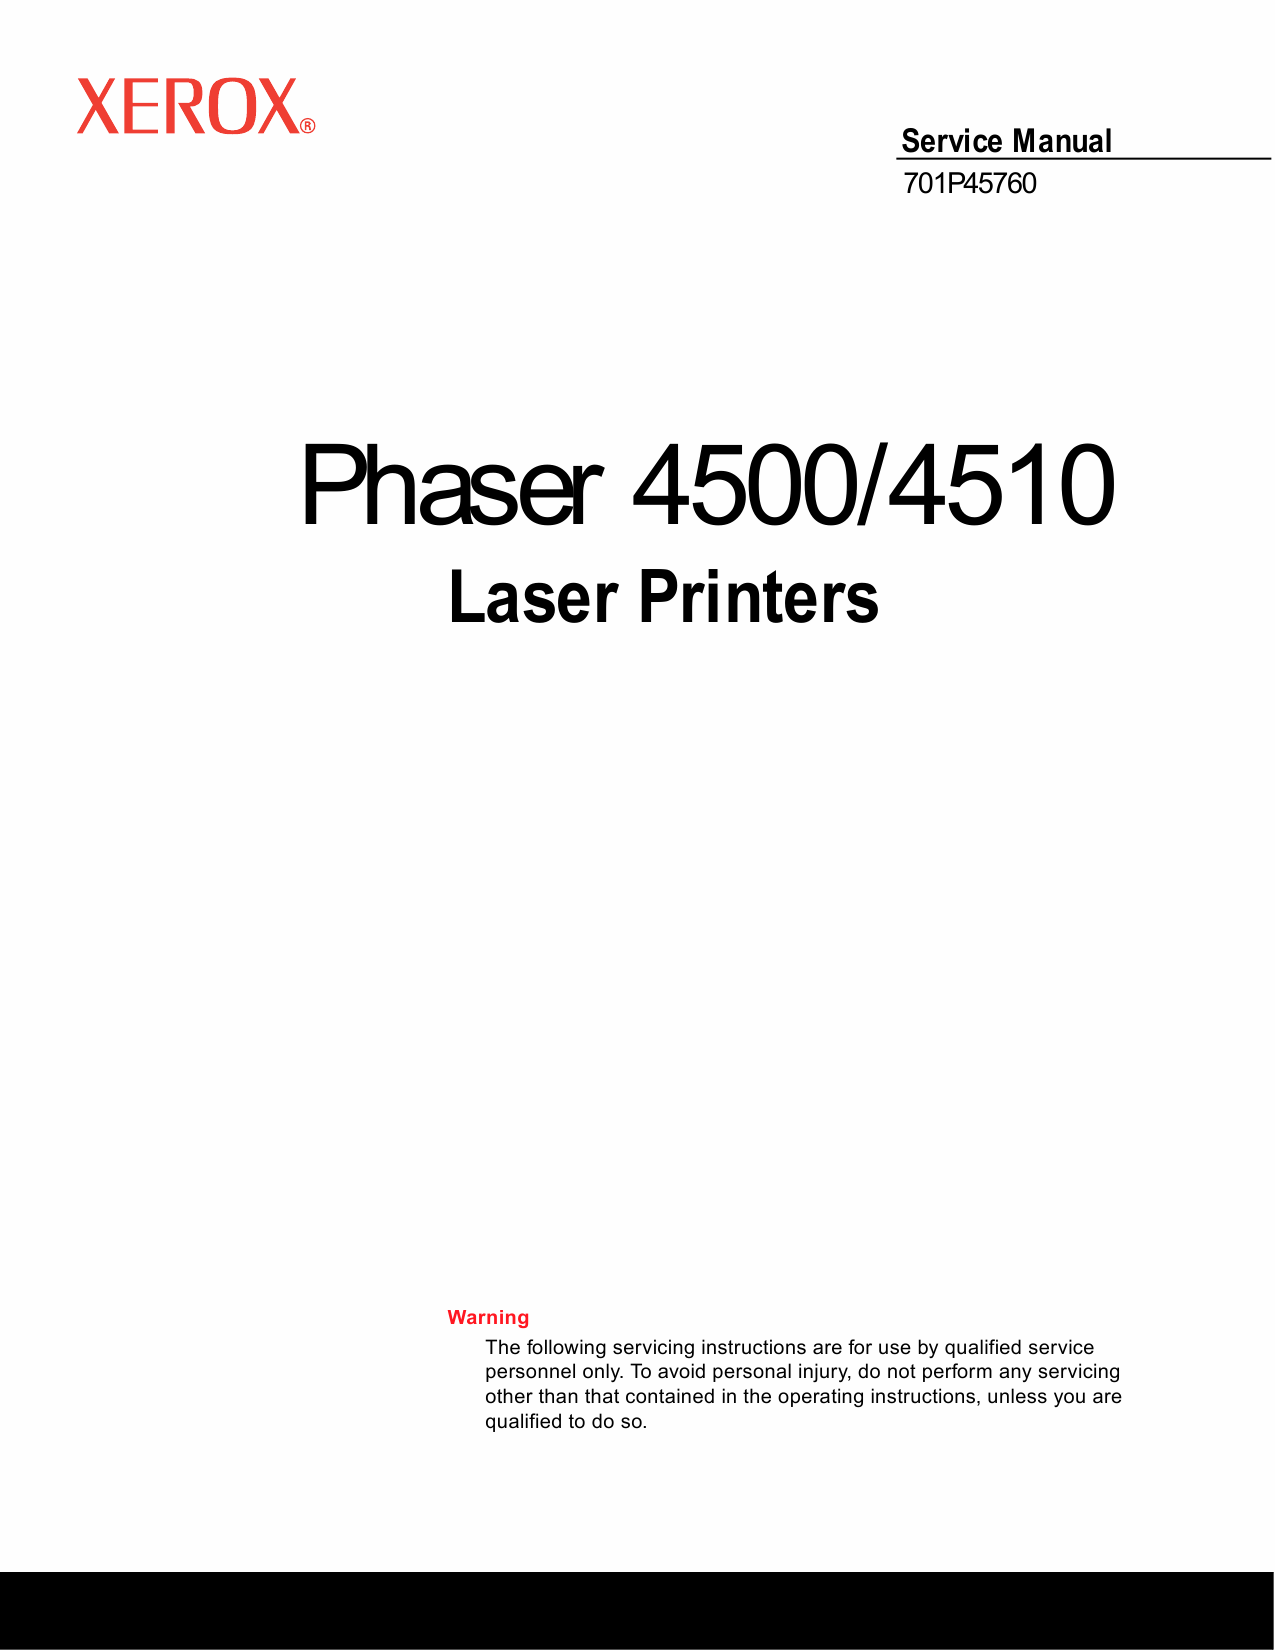 Xerox Phaser 4500 4510 Parts List and Service Manual-1